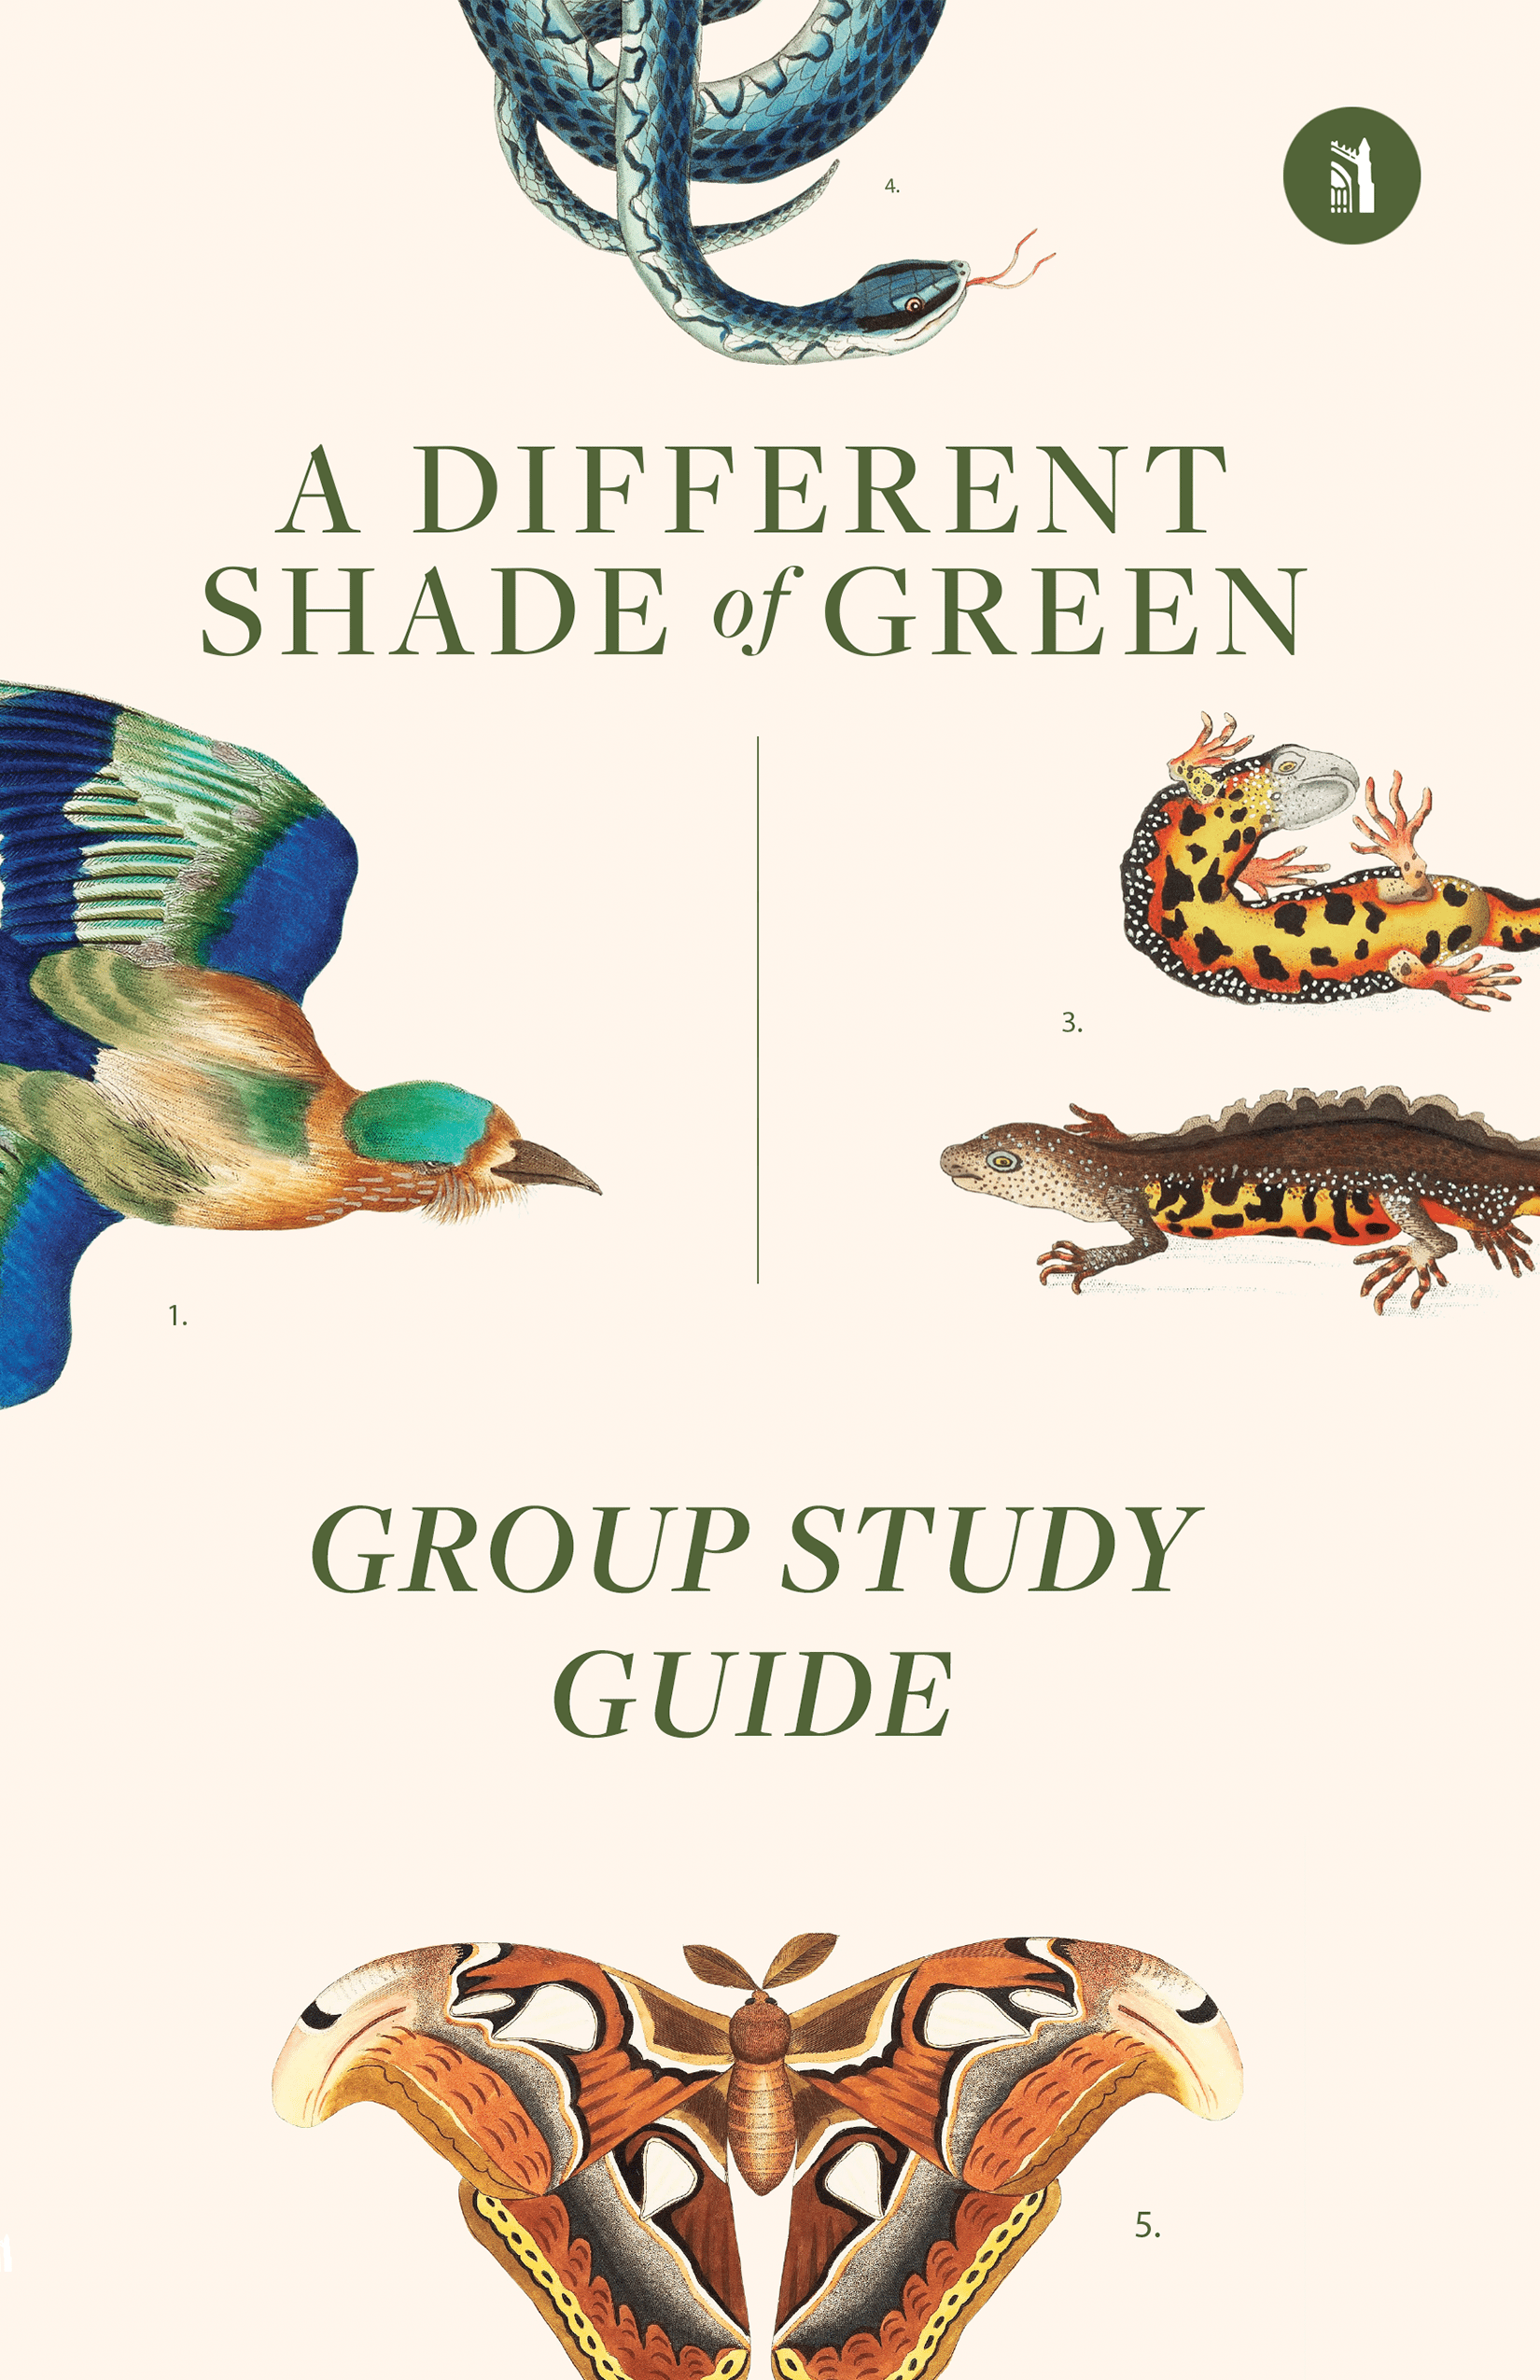 A Different Shade of Green Group Study Guide